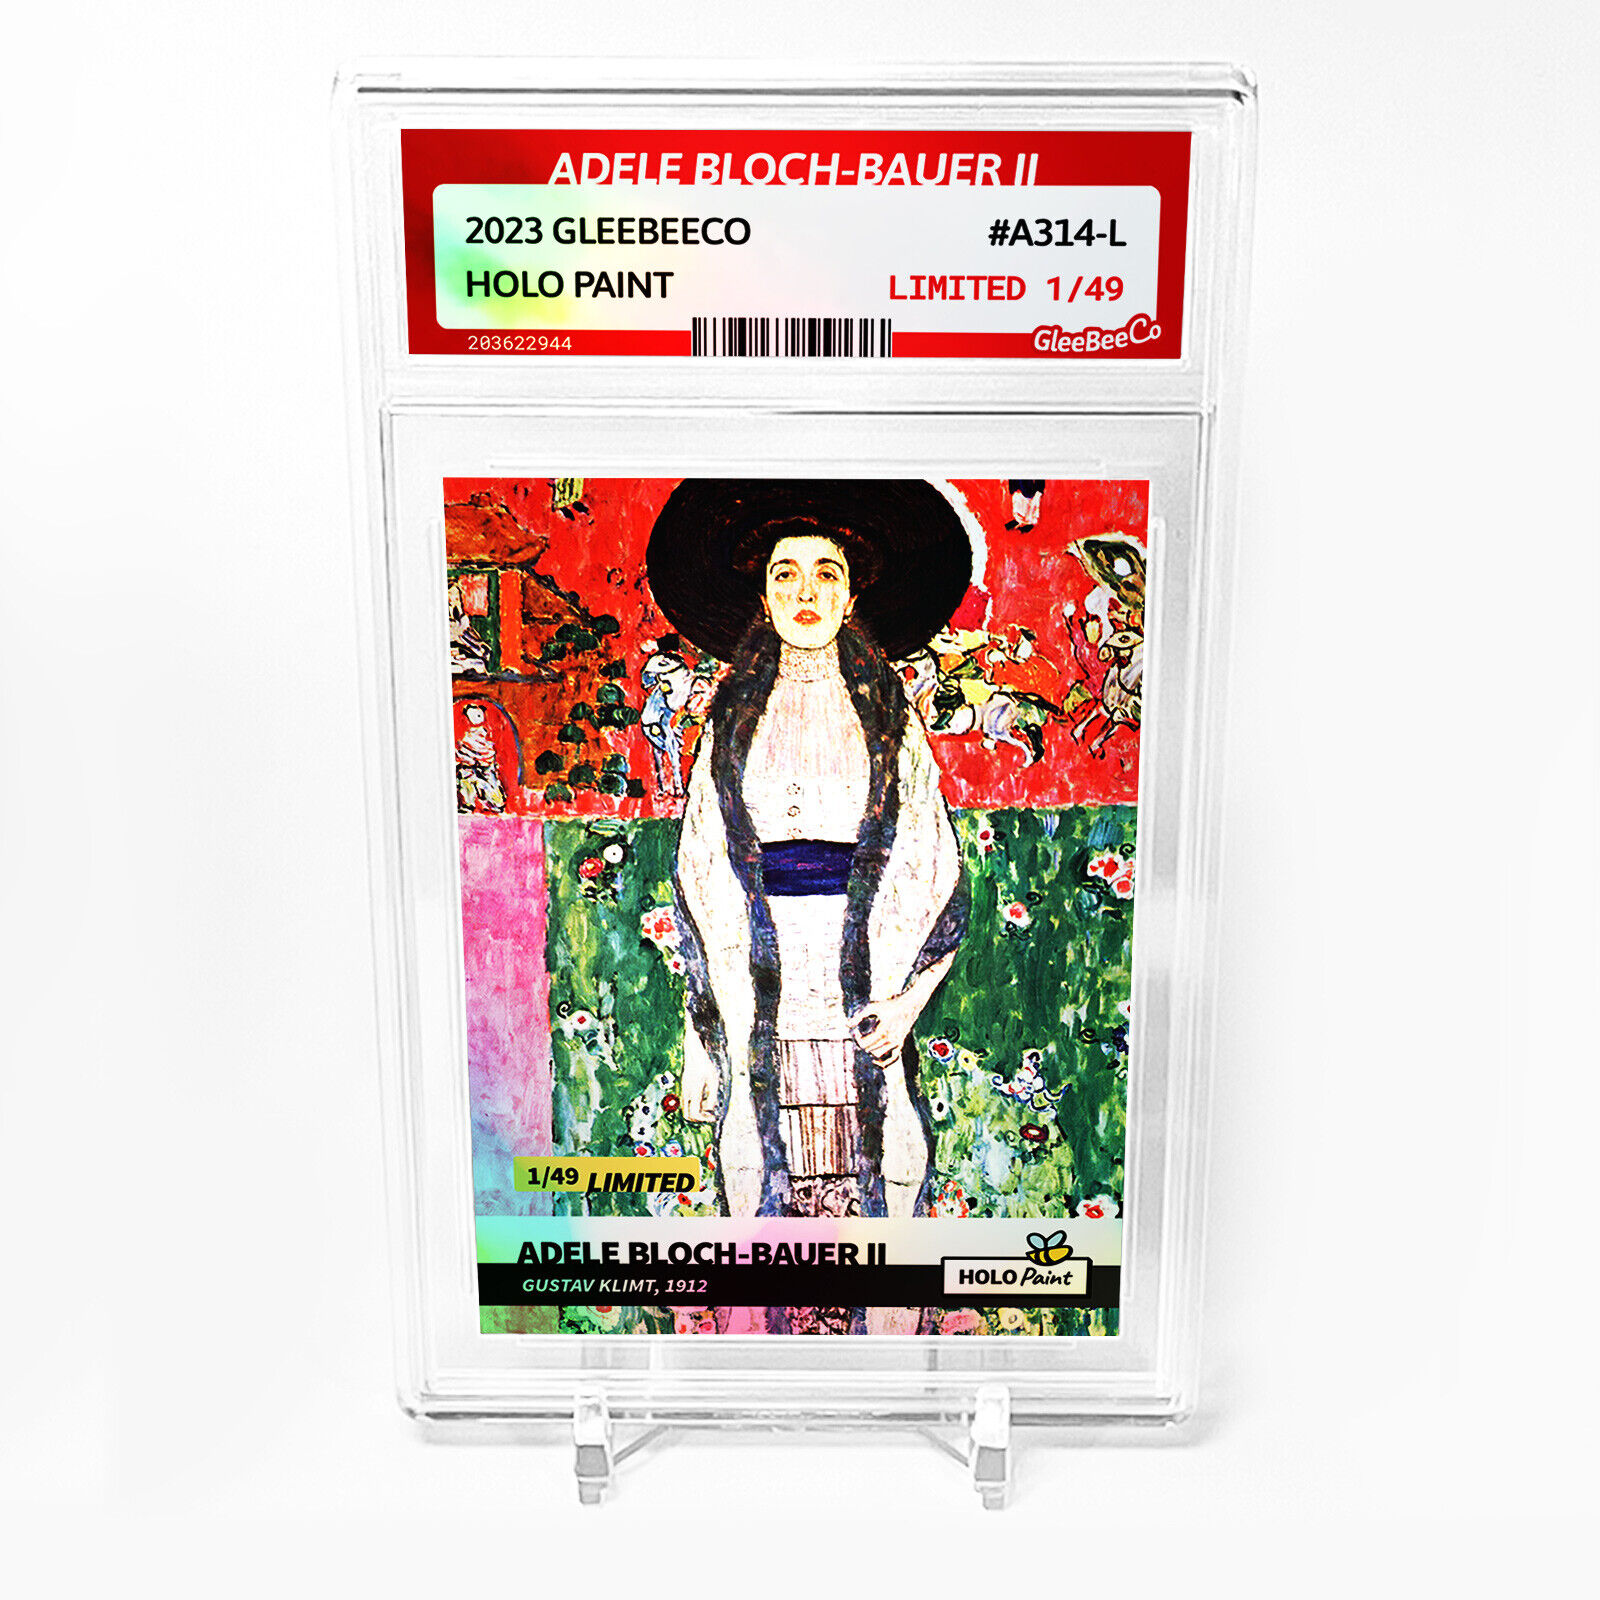 ADELE BLOCH-BAUER II Card 2023 GleeBeeCo Holo Paint #A314-L /49 Made